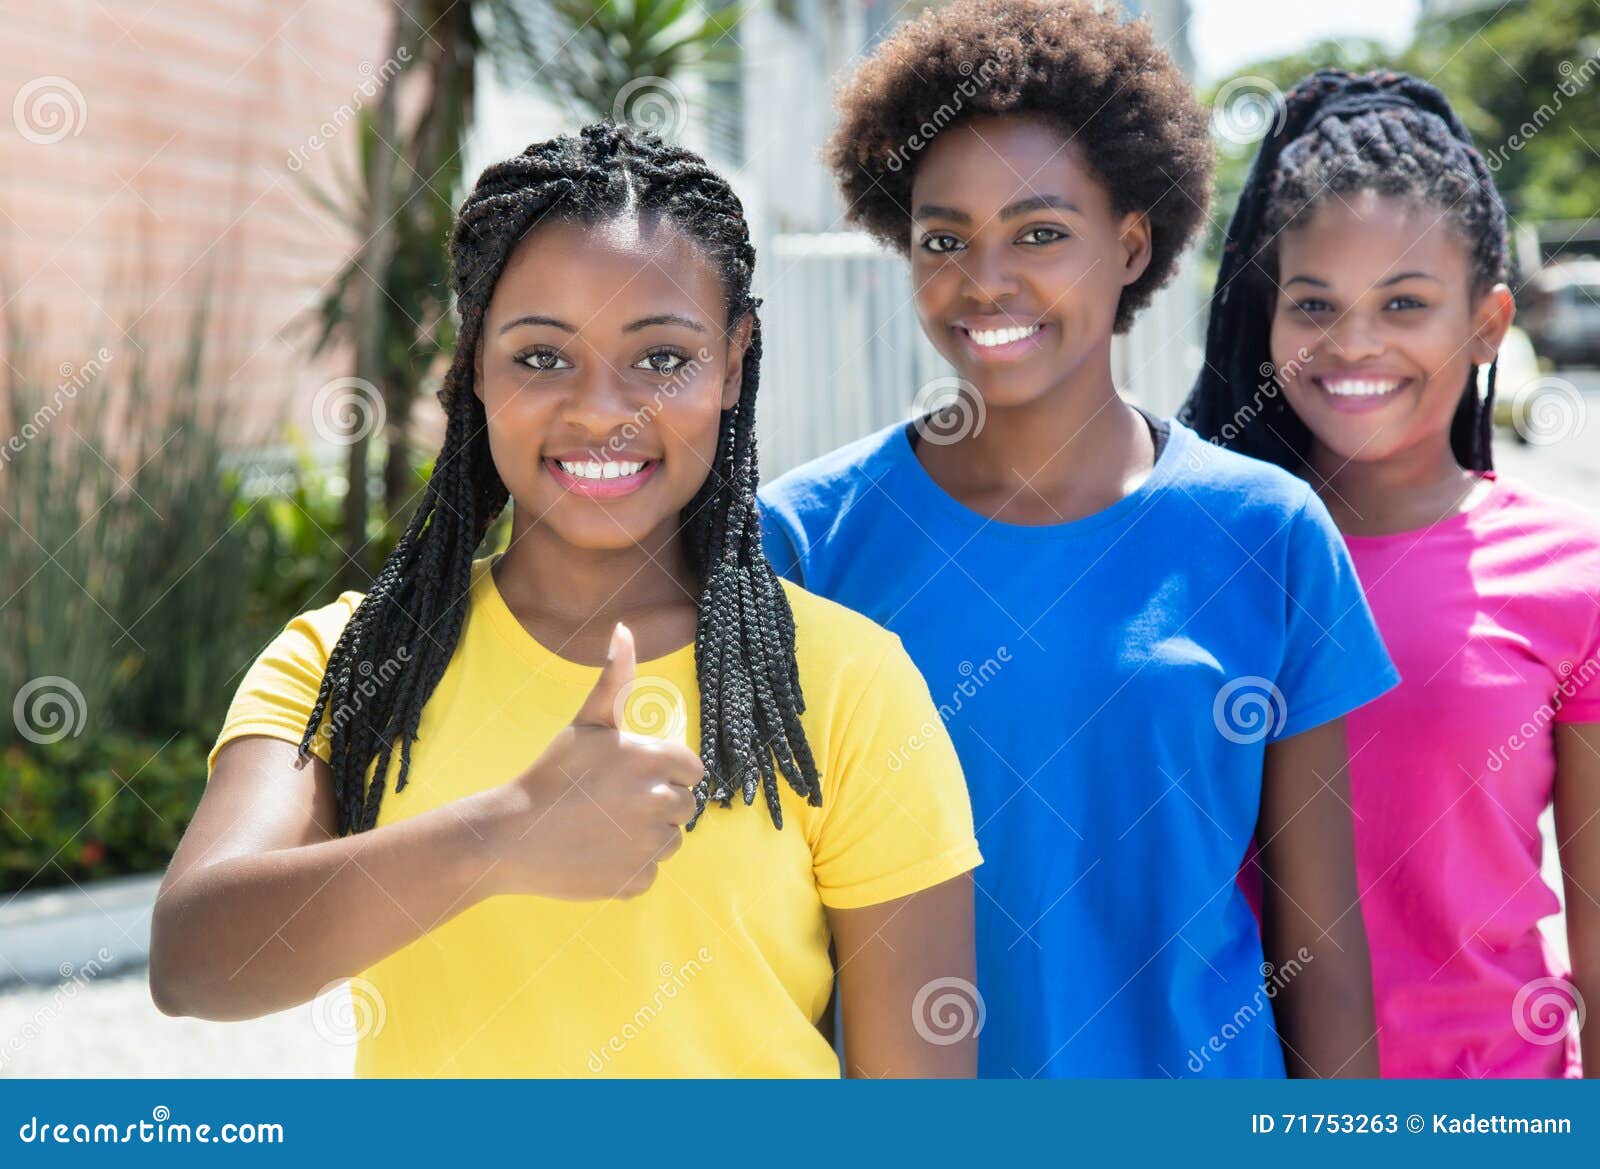 African American Girl with Two Girlfriends Showing Thumb Stoc image pic